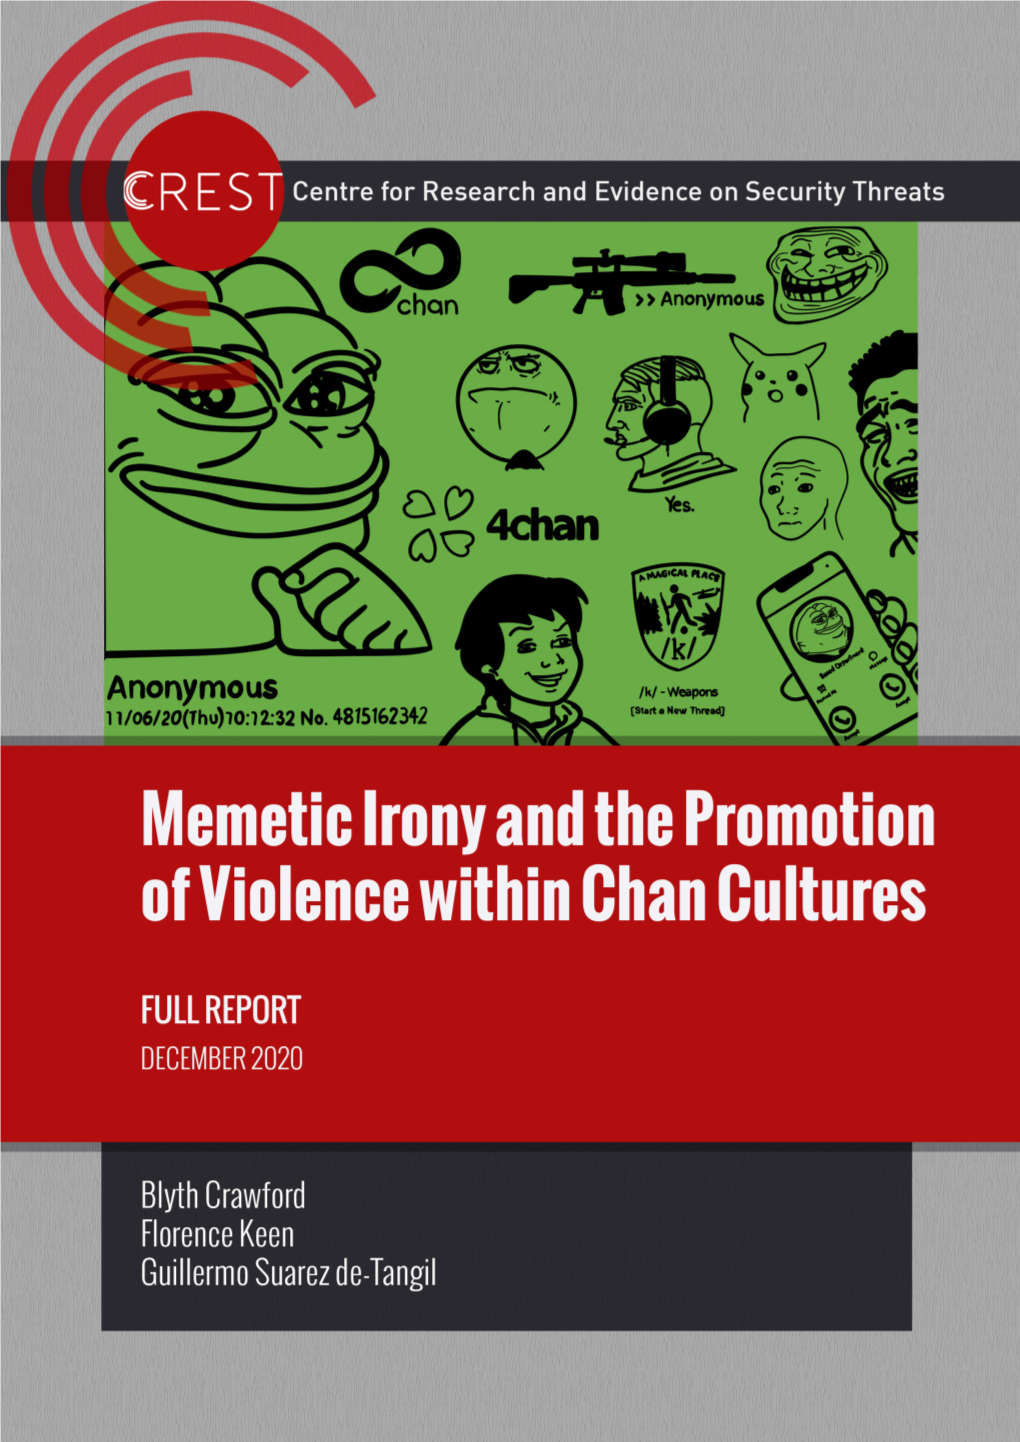 Memetic Irony and the Promotion of Violence Within Chan Cultures FULL REPORT